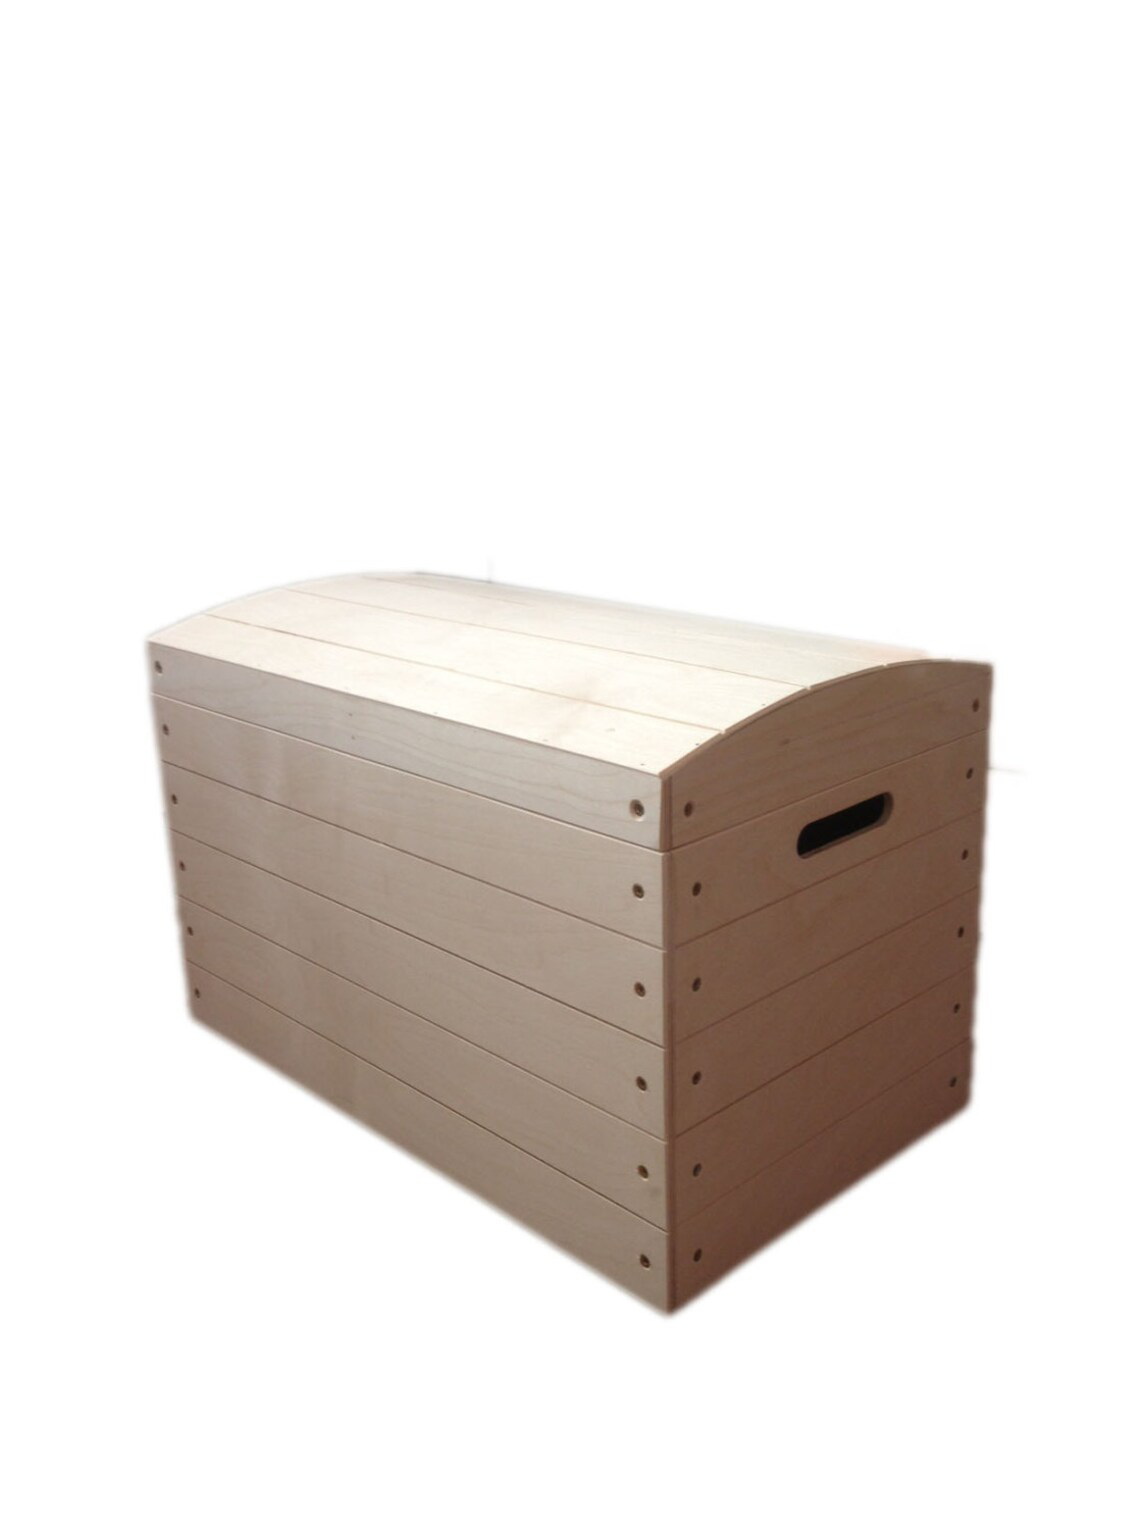 Large Wooden Storage Box with Curved Lid and Handles - White Background